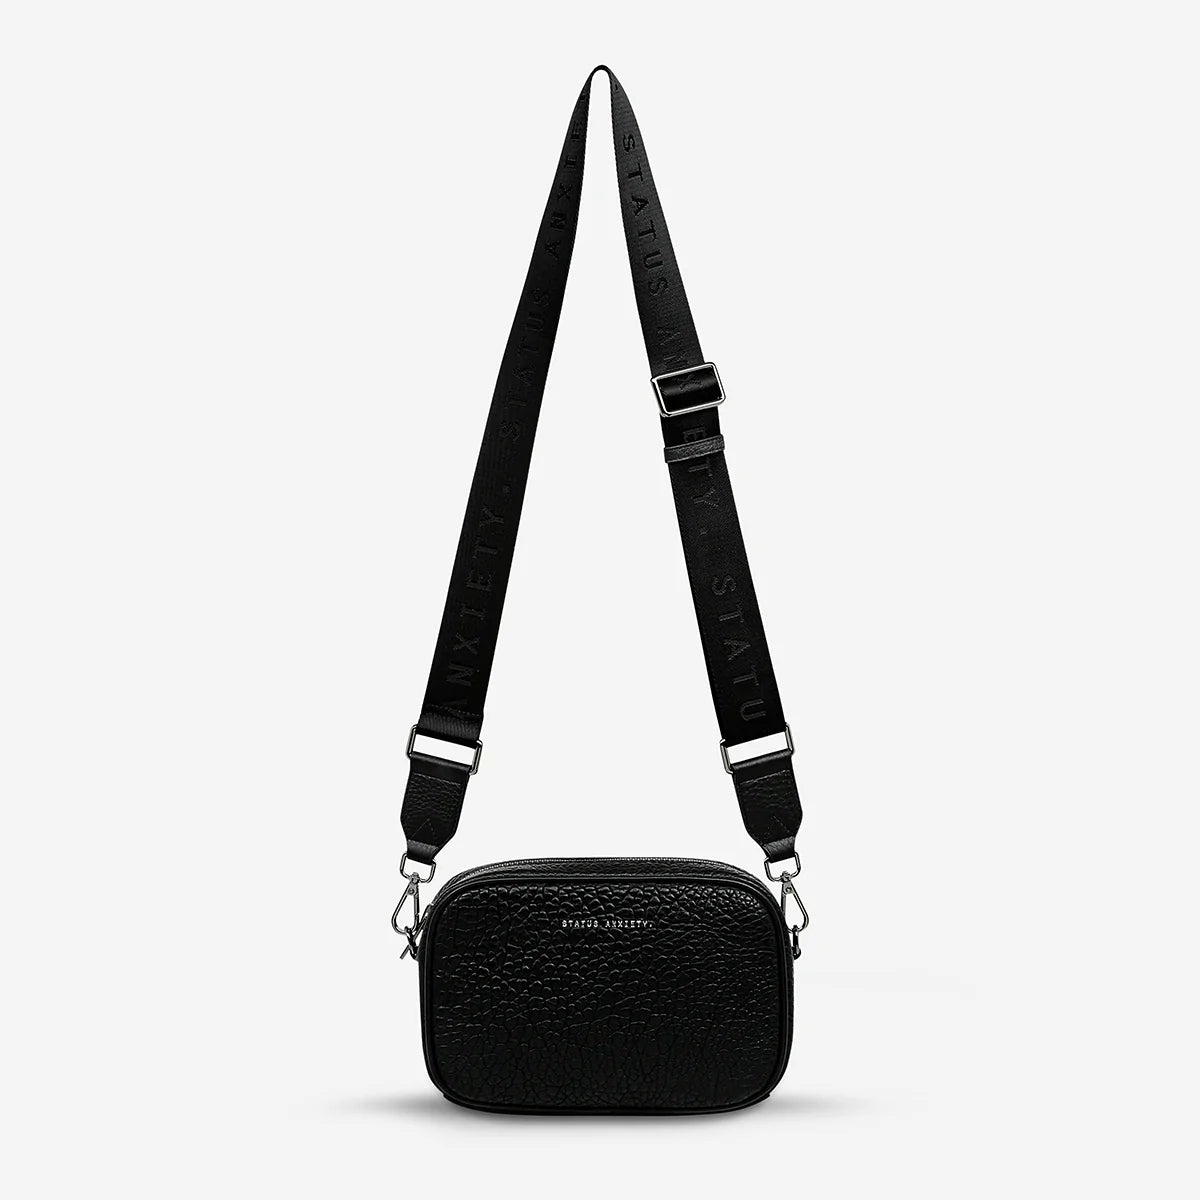 Status Anxiety Bag - Plunder - Black Bubble Leather with Webbed